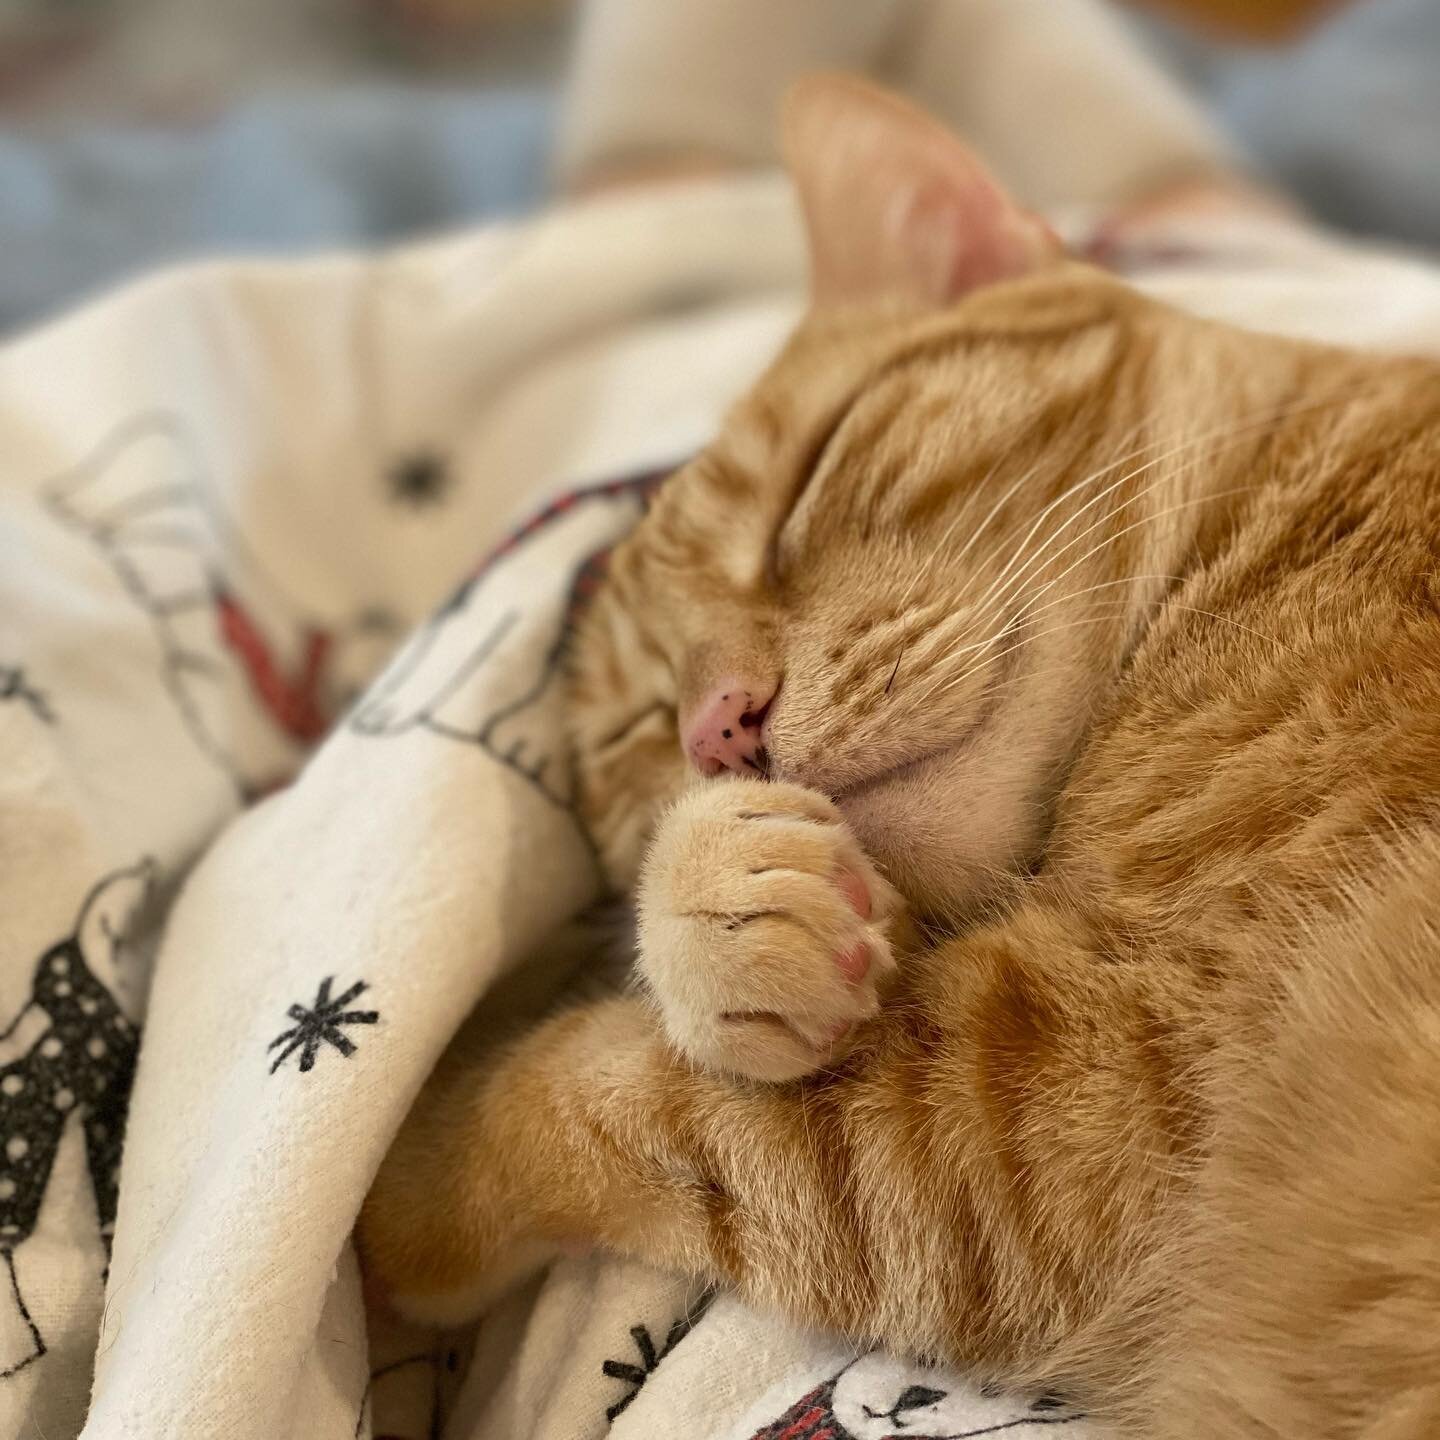 Happy Caturday! May your catnap dreams be as happy as Blaze&rsquo;s seem to be! 😻🧡

#shenandsam #shenandsamco #happycaturday #caturday #catnaps #gingercatsrule #gingercatsrock